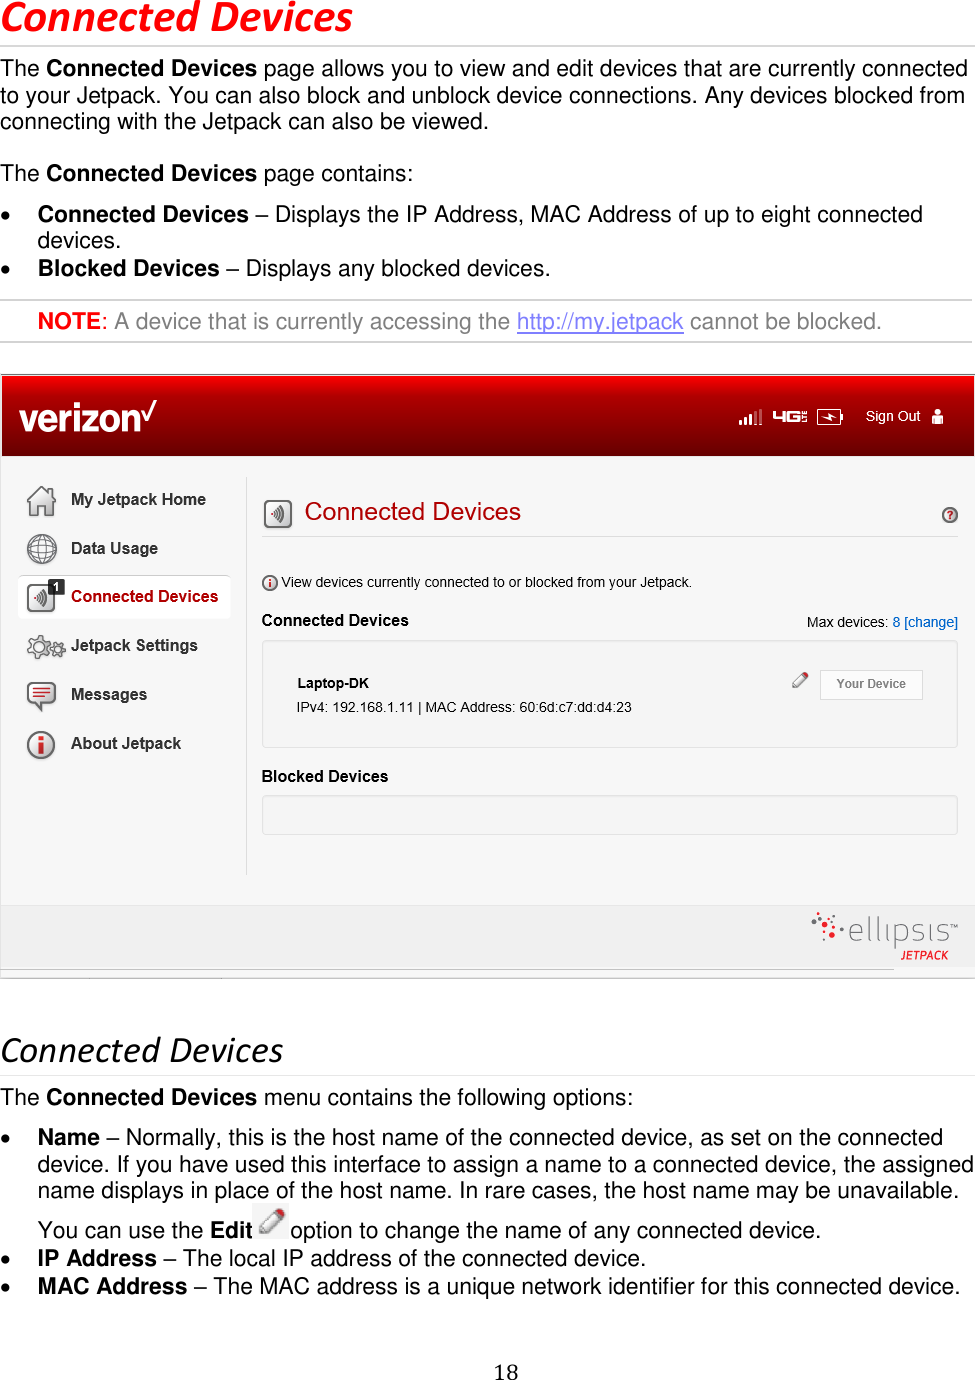   18  Connected Devices The Connected Devices page allows you to view and edit devices that are currently connected to your Jetpack. You can also block and unblock device connections. Any devices blocked from connecting with the Jetpack can also be viewed.  The Connected Devices page contains:  Connected Devices – Displays the IP Address, MAC Address of up to eight connected devices.  Blocked Devices – Displays any blocked devices.  NOTE: A device that is currently accessing the http://my.jetpack cannot be blocked.    Connected Devices The Connected Devices menu contains the following options:  Name – Normally, this is the host name of the connected device, as set on the connected device. If you have used this interface to assign a name to a connected device, the assigned name displays in place of the host name. In rare cases, the host name may be unavailable. You can use the Edit option to change the name of any connected device.  IP Address – The local IP address of the connected device.  MAC Address – The MAC address is a unique network identifier for this connected device. 